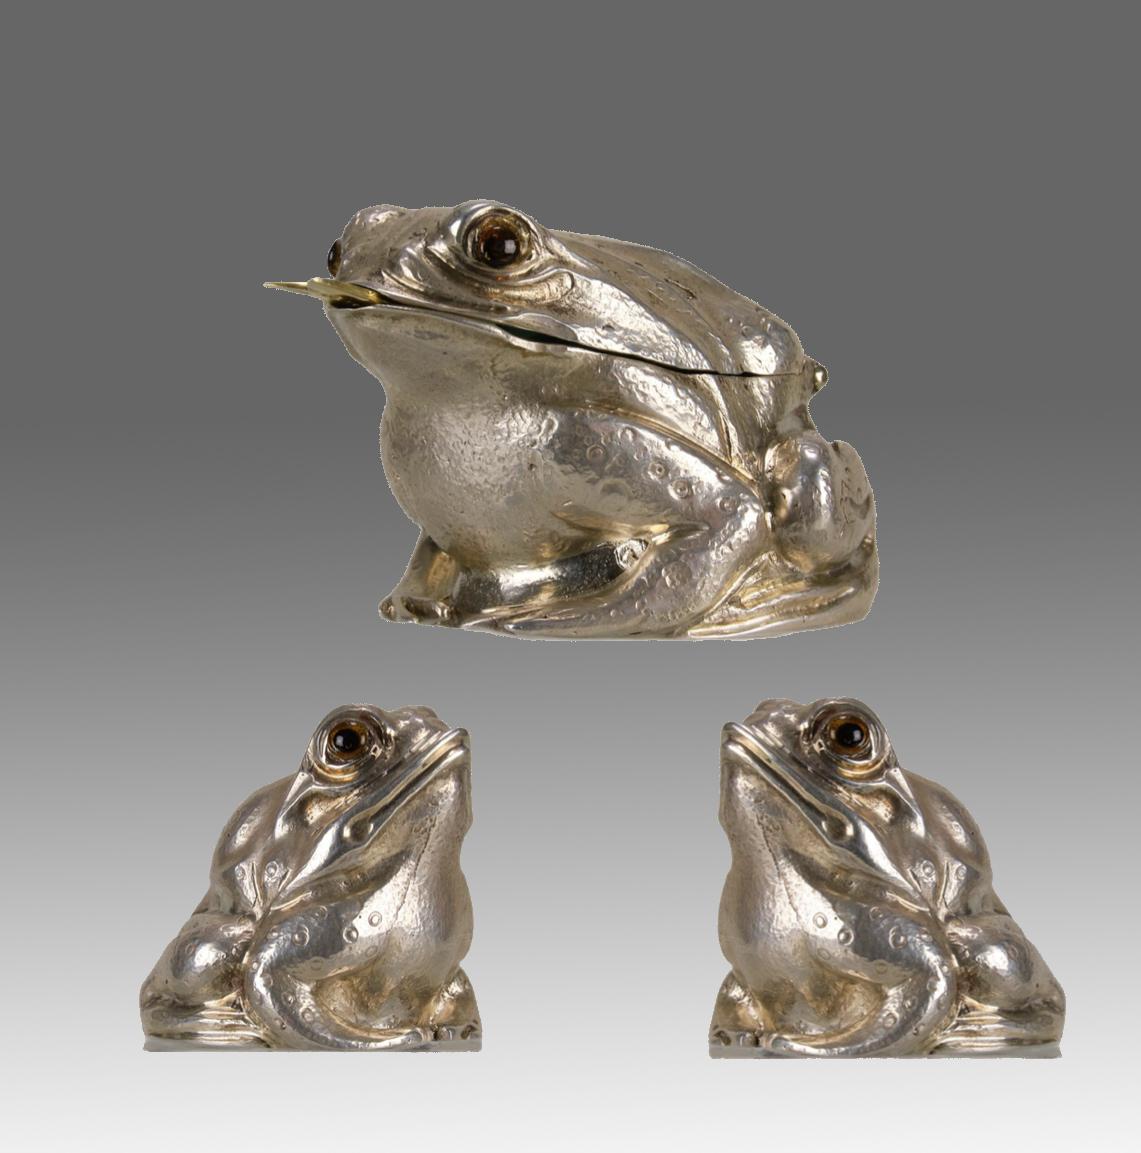 A charming solid silver cruet set modelled as three seated frogs. The set made up of a salt, pepper and mustard pot all with realistic garnet eyes. The mustard pot hinged at the frogs neck to reveal a green glass liner with silver gilt spoon